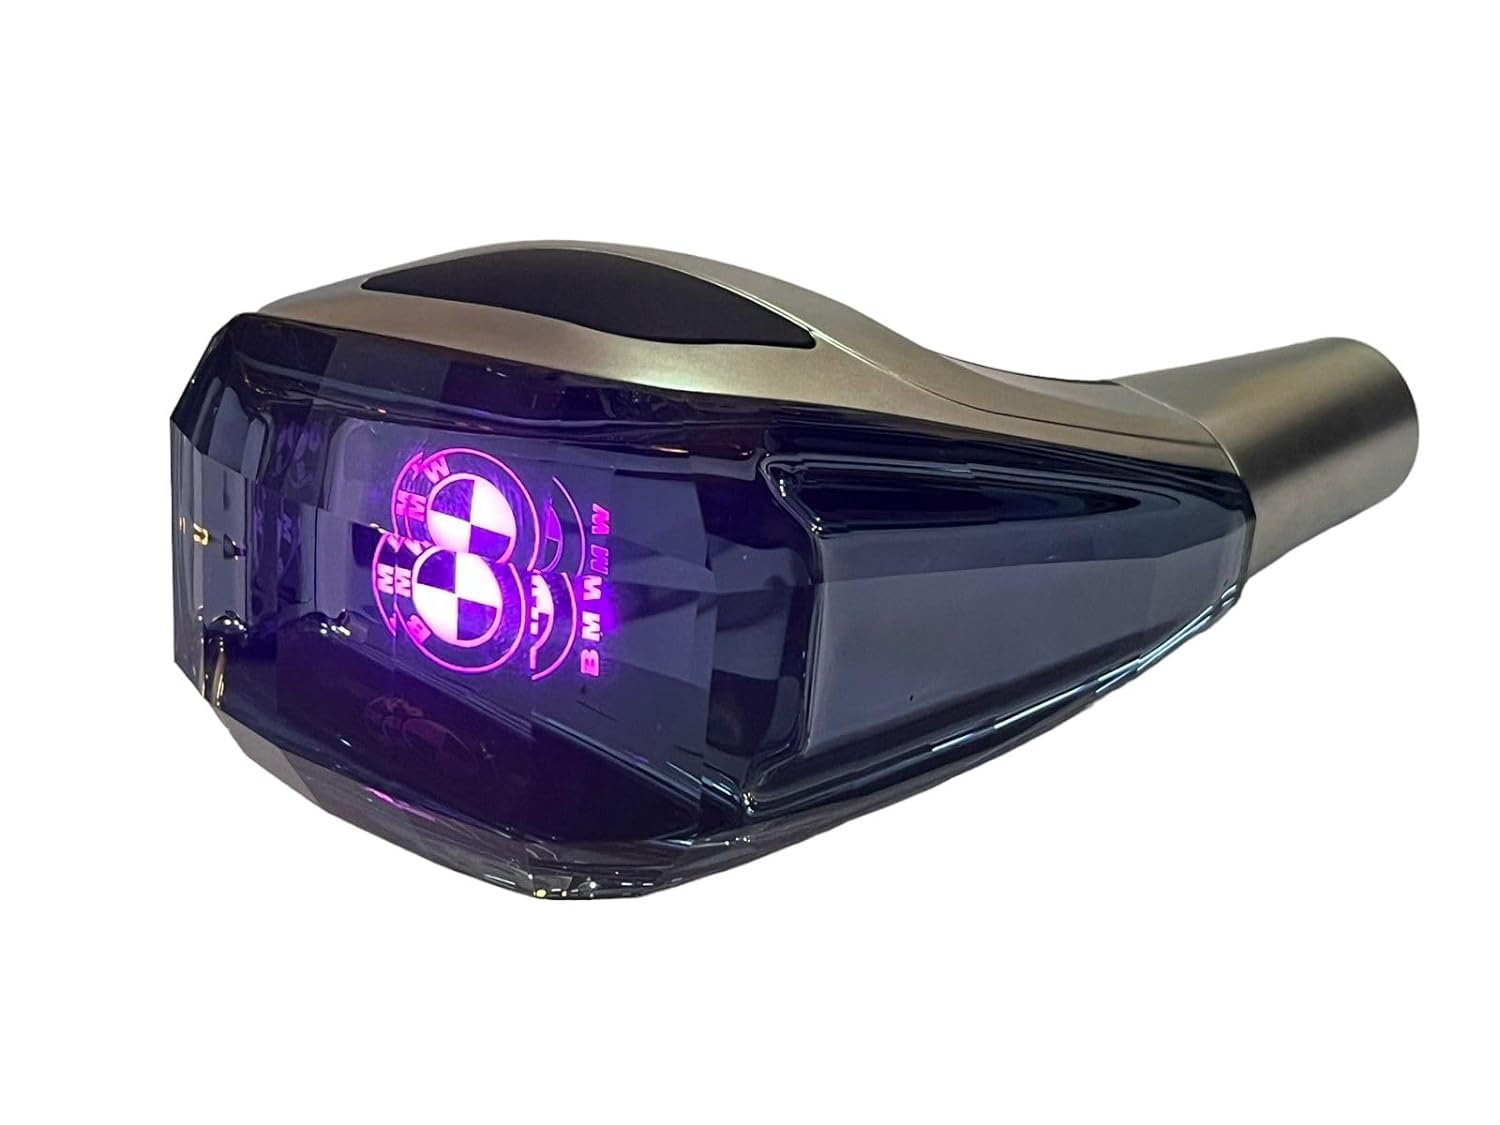 Crystal Shift knob Touch Activated Ultra LED Light Illuminated Gear Shift Knob, Fits For Most Cars with Button-Less Operated Shifter Fit For B-MW Cars Image 